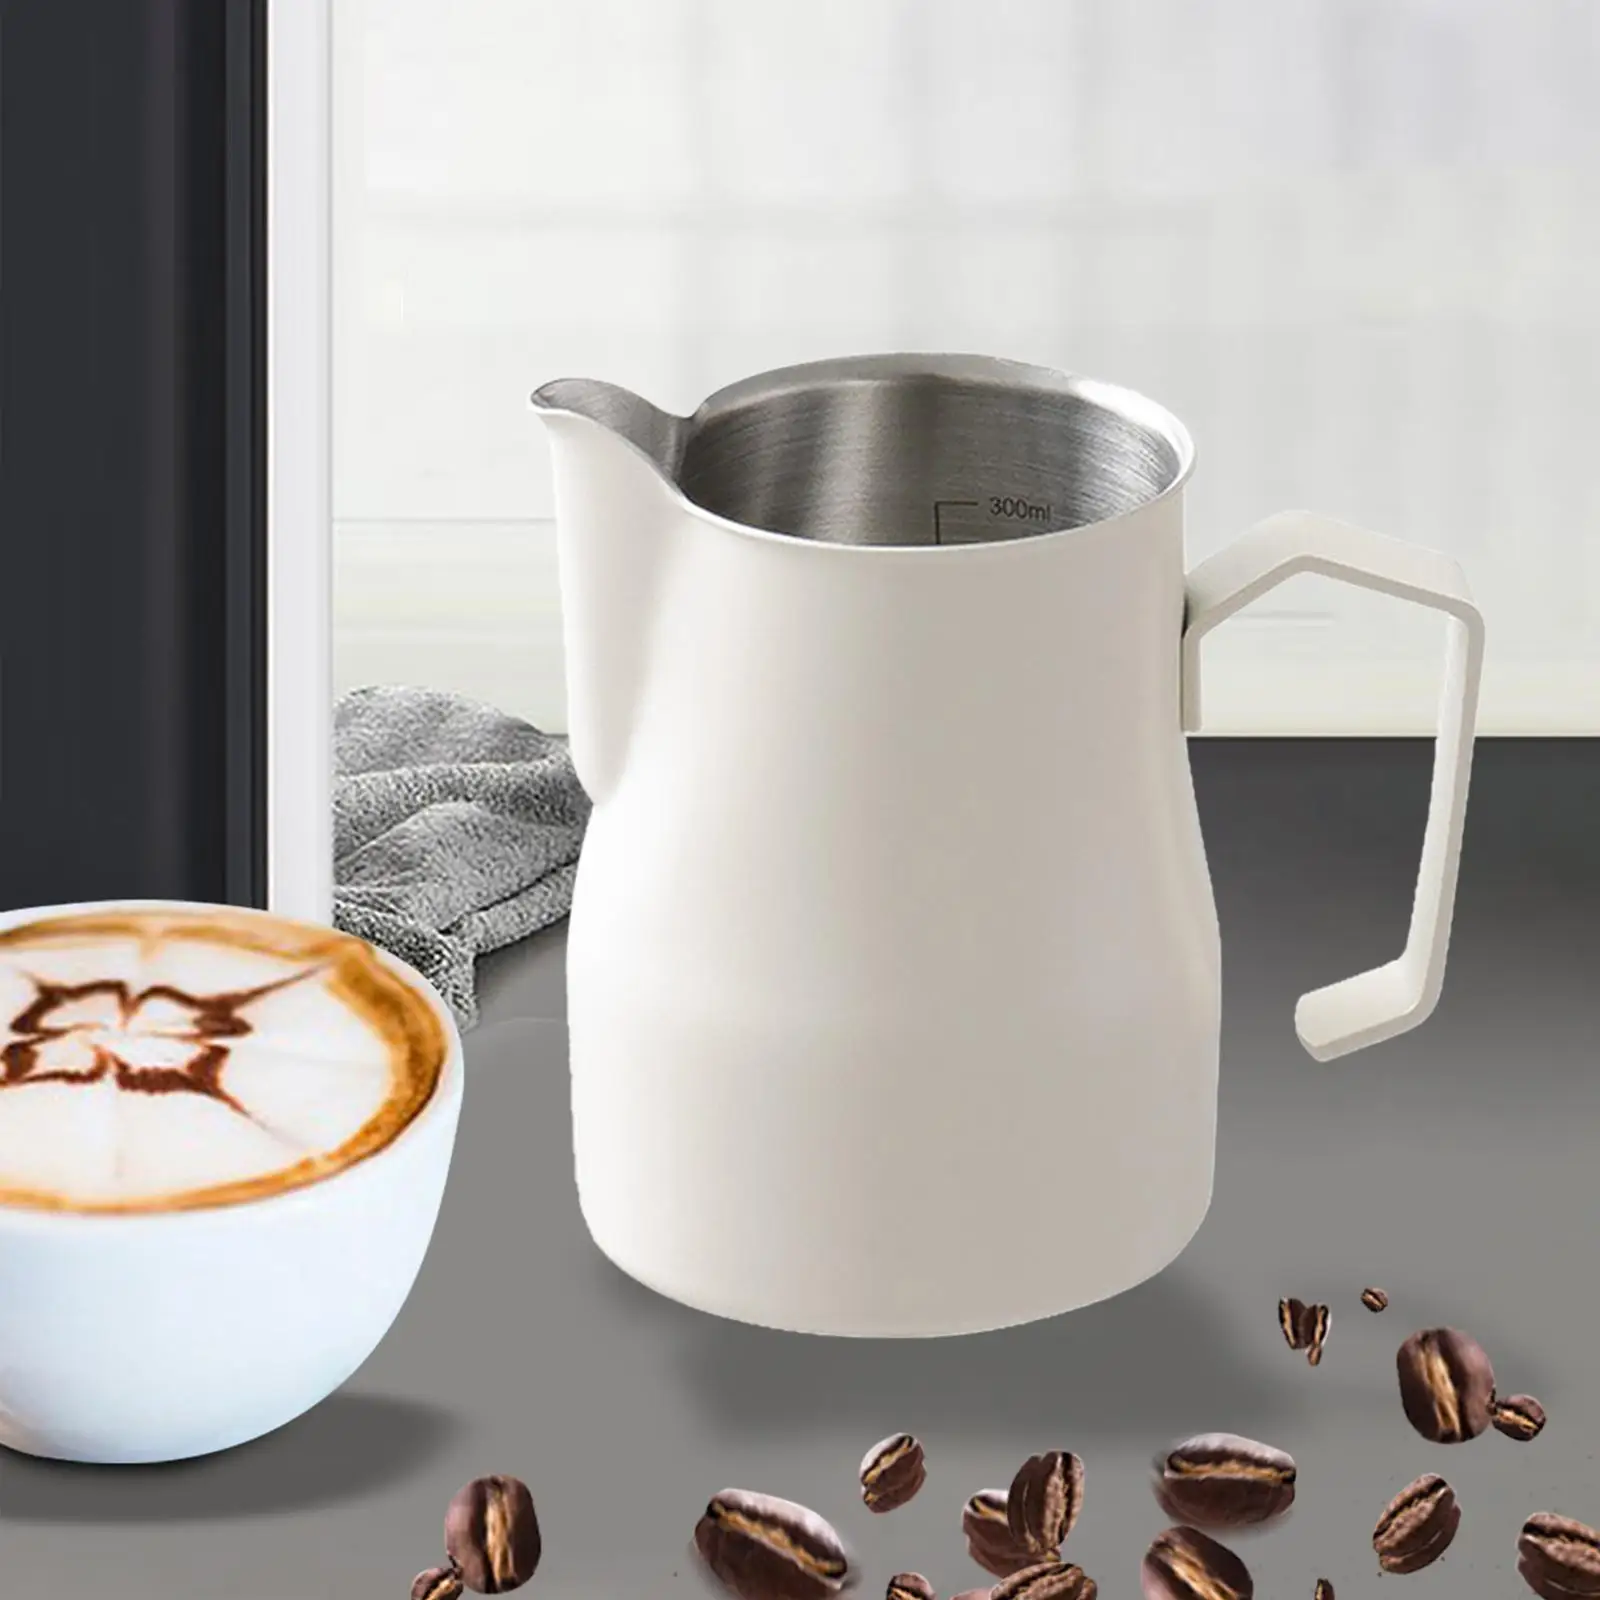 Milk Frothing Pitcher Stainless Steel Espresso Machine Accessories Milk Frother Cup Espresso Steaming Pitcher for Home cafe